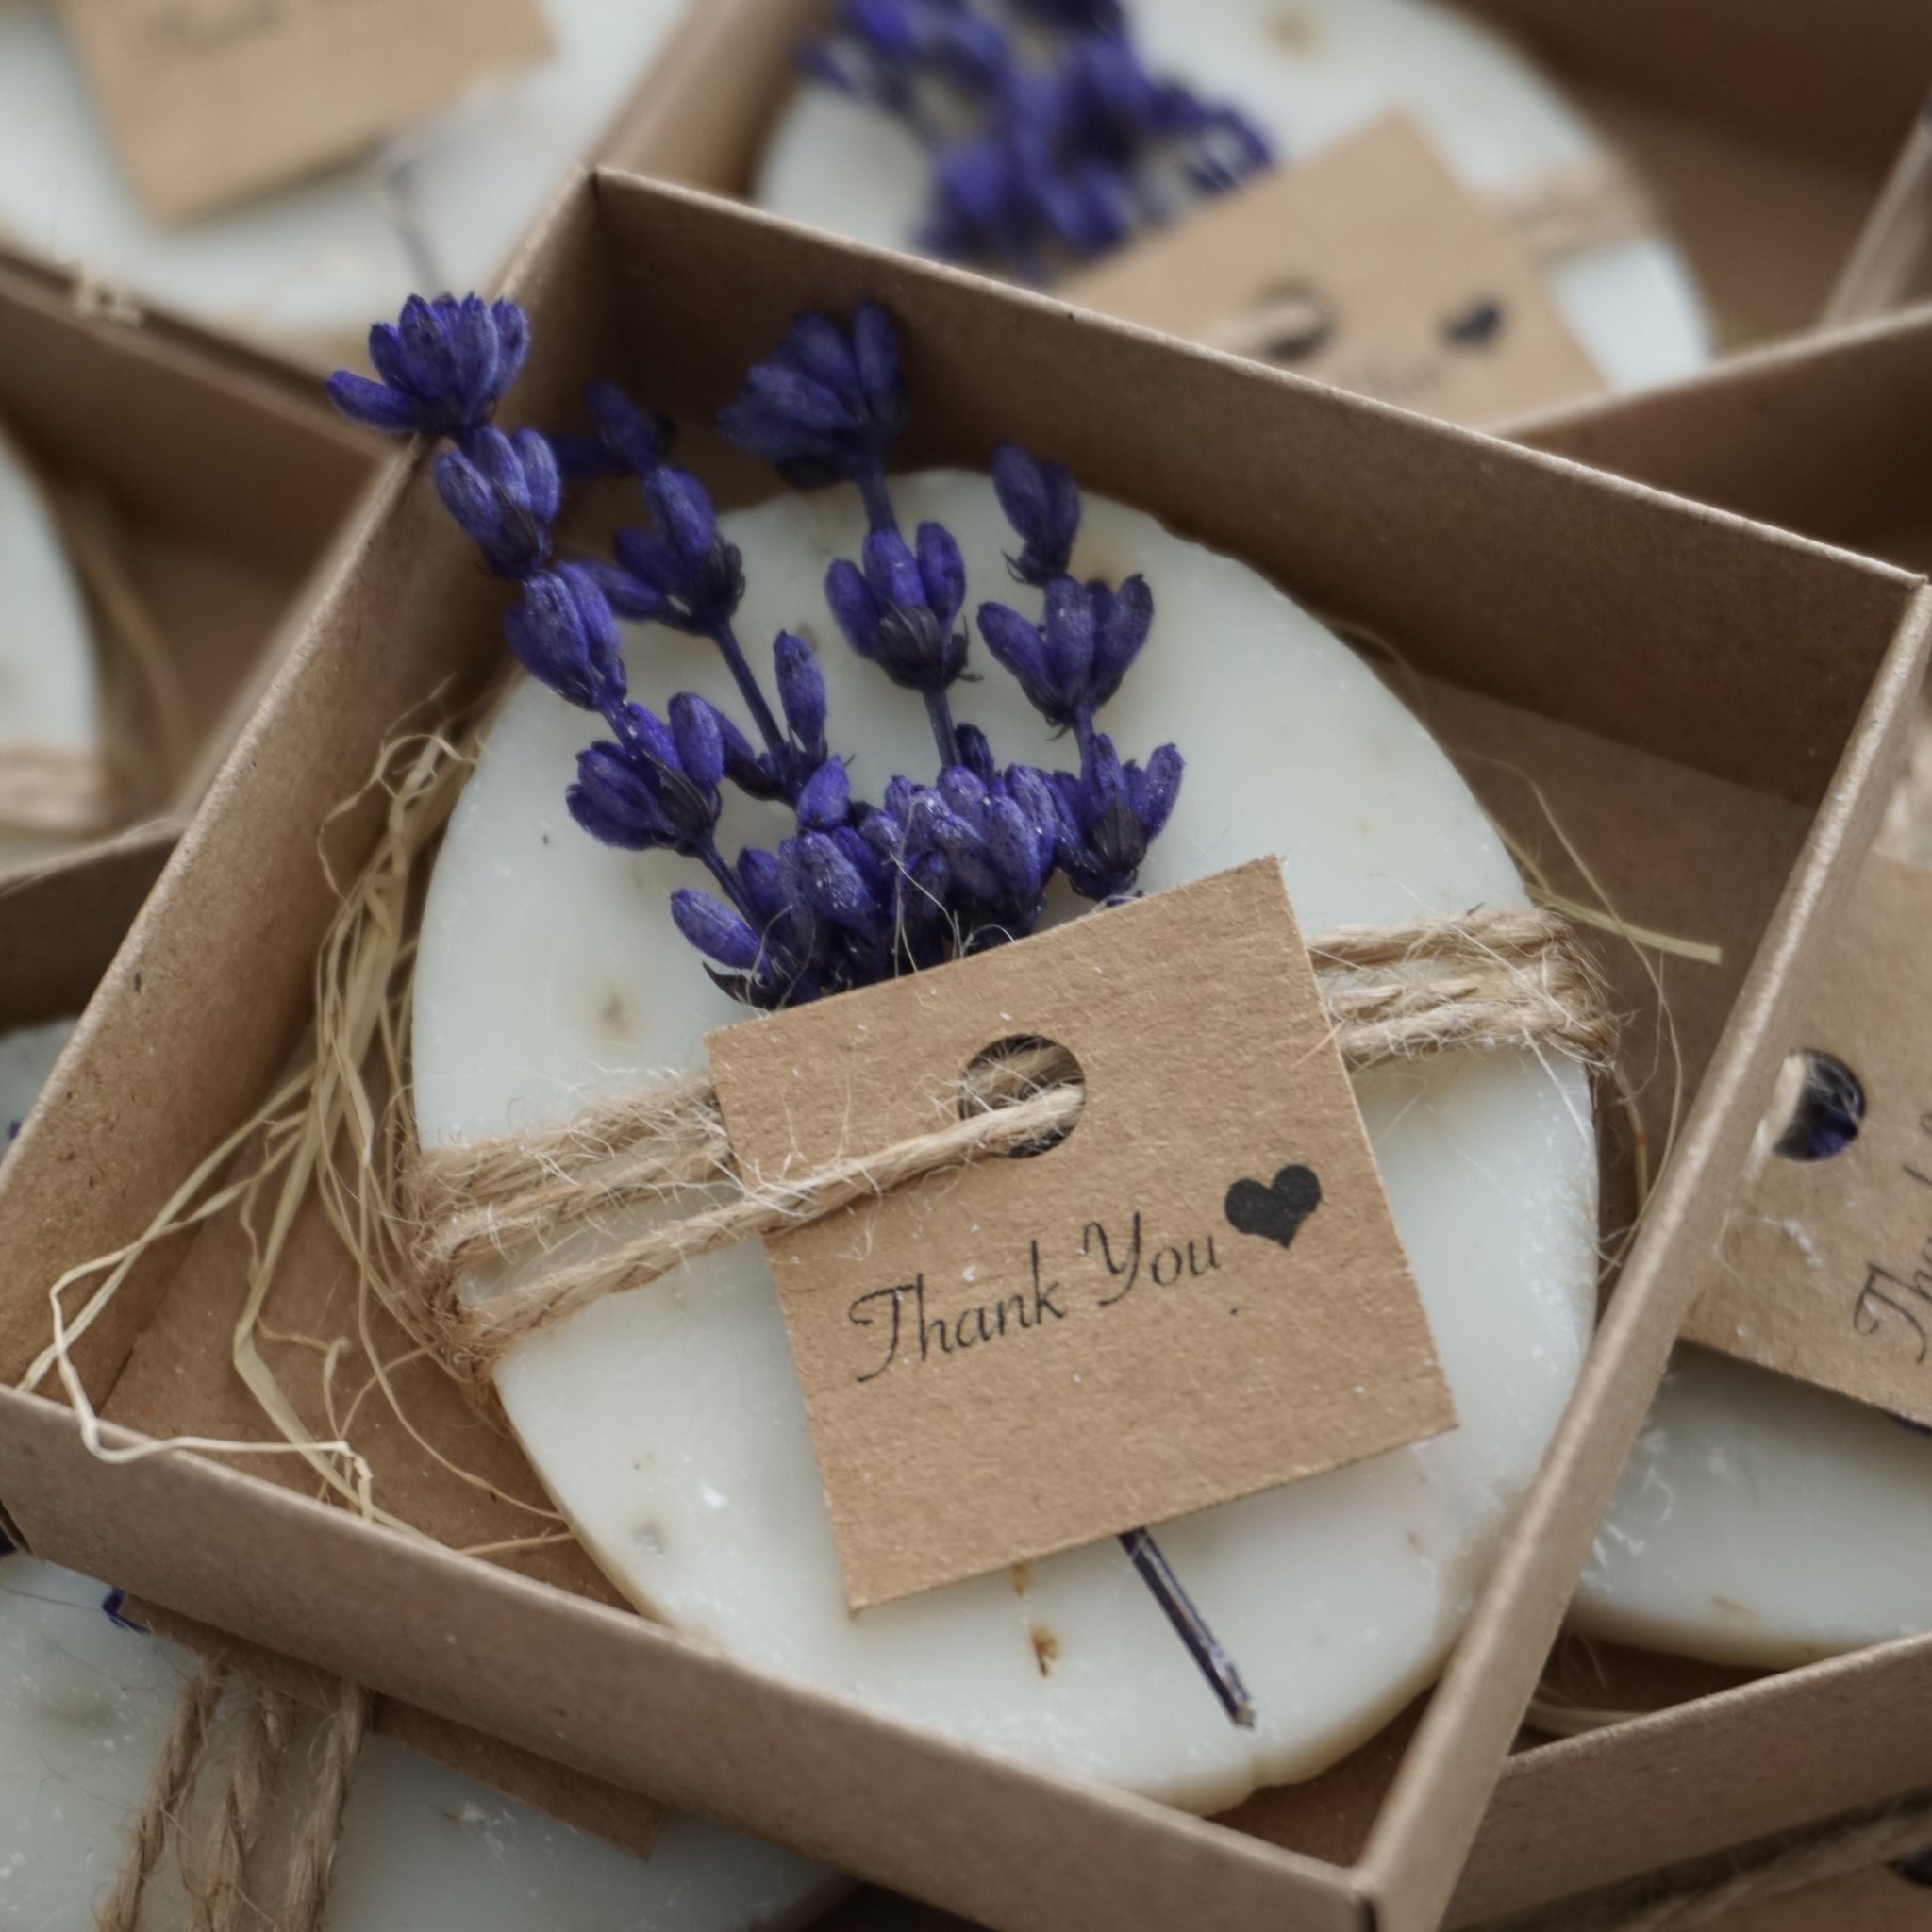 Personalized Lavender Soap Favors for Weddings, Thank You Gift For Guests, Bridal Shower Soap, Baby Shower Favors, Bulk Party Favors